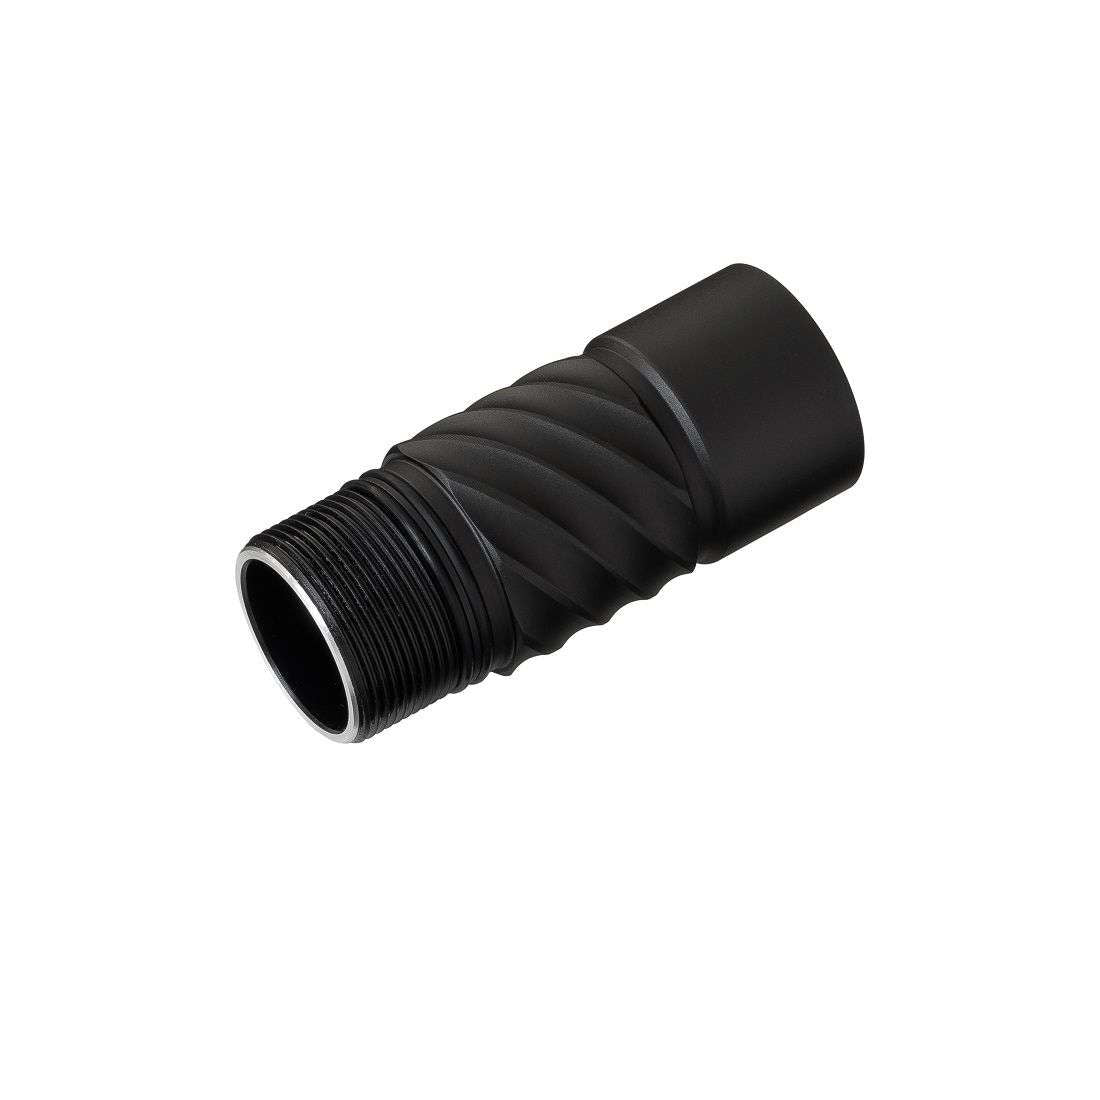 Weltool BB5 extension tube for W5/W5Pro flashlight